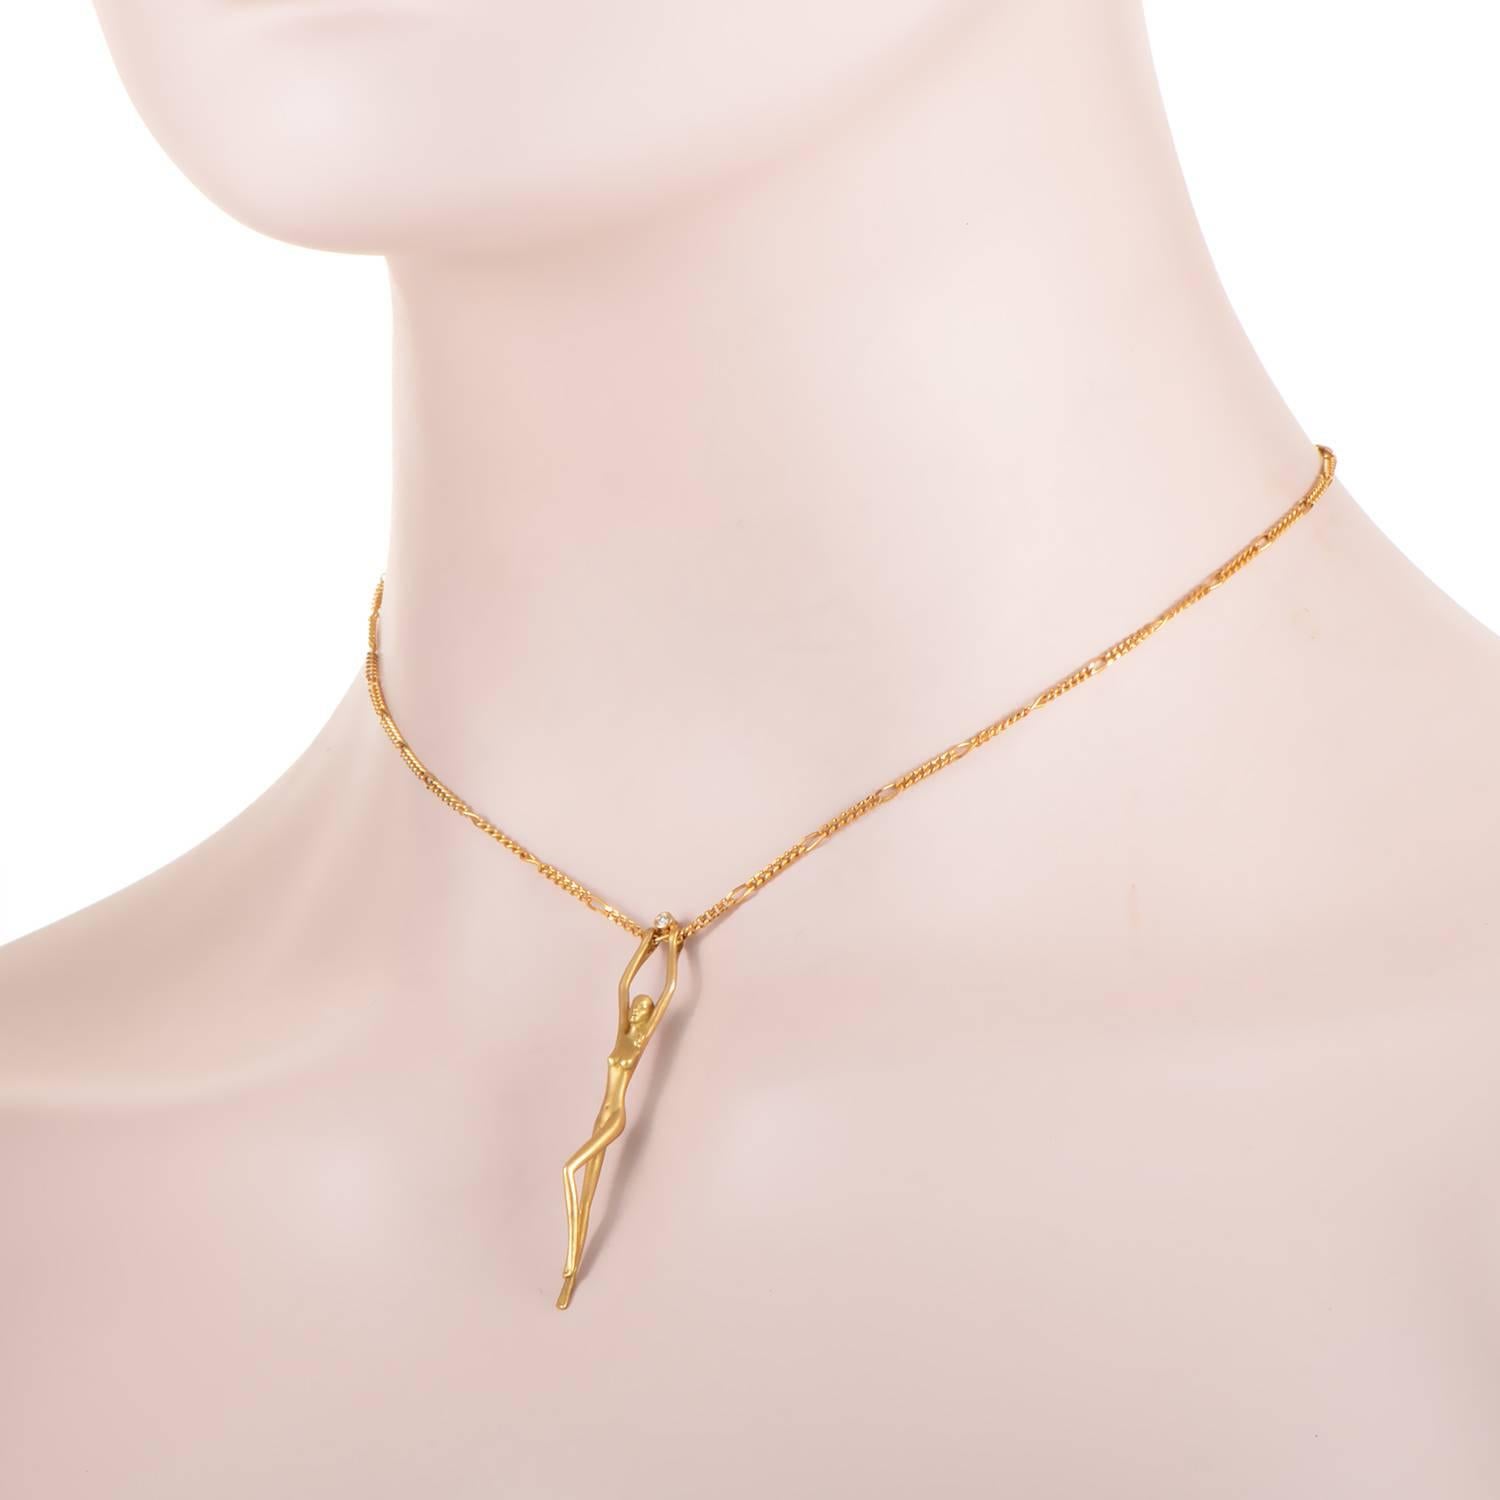 An unforgettable piece that provides a refined display of the gorgeous feminine mystique by Carrera y Carrera is yet another stunning example of the science Carrera y Carrera has turned sculpting metal into. The delicate 18K yellow gold figaro chain